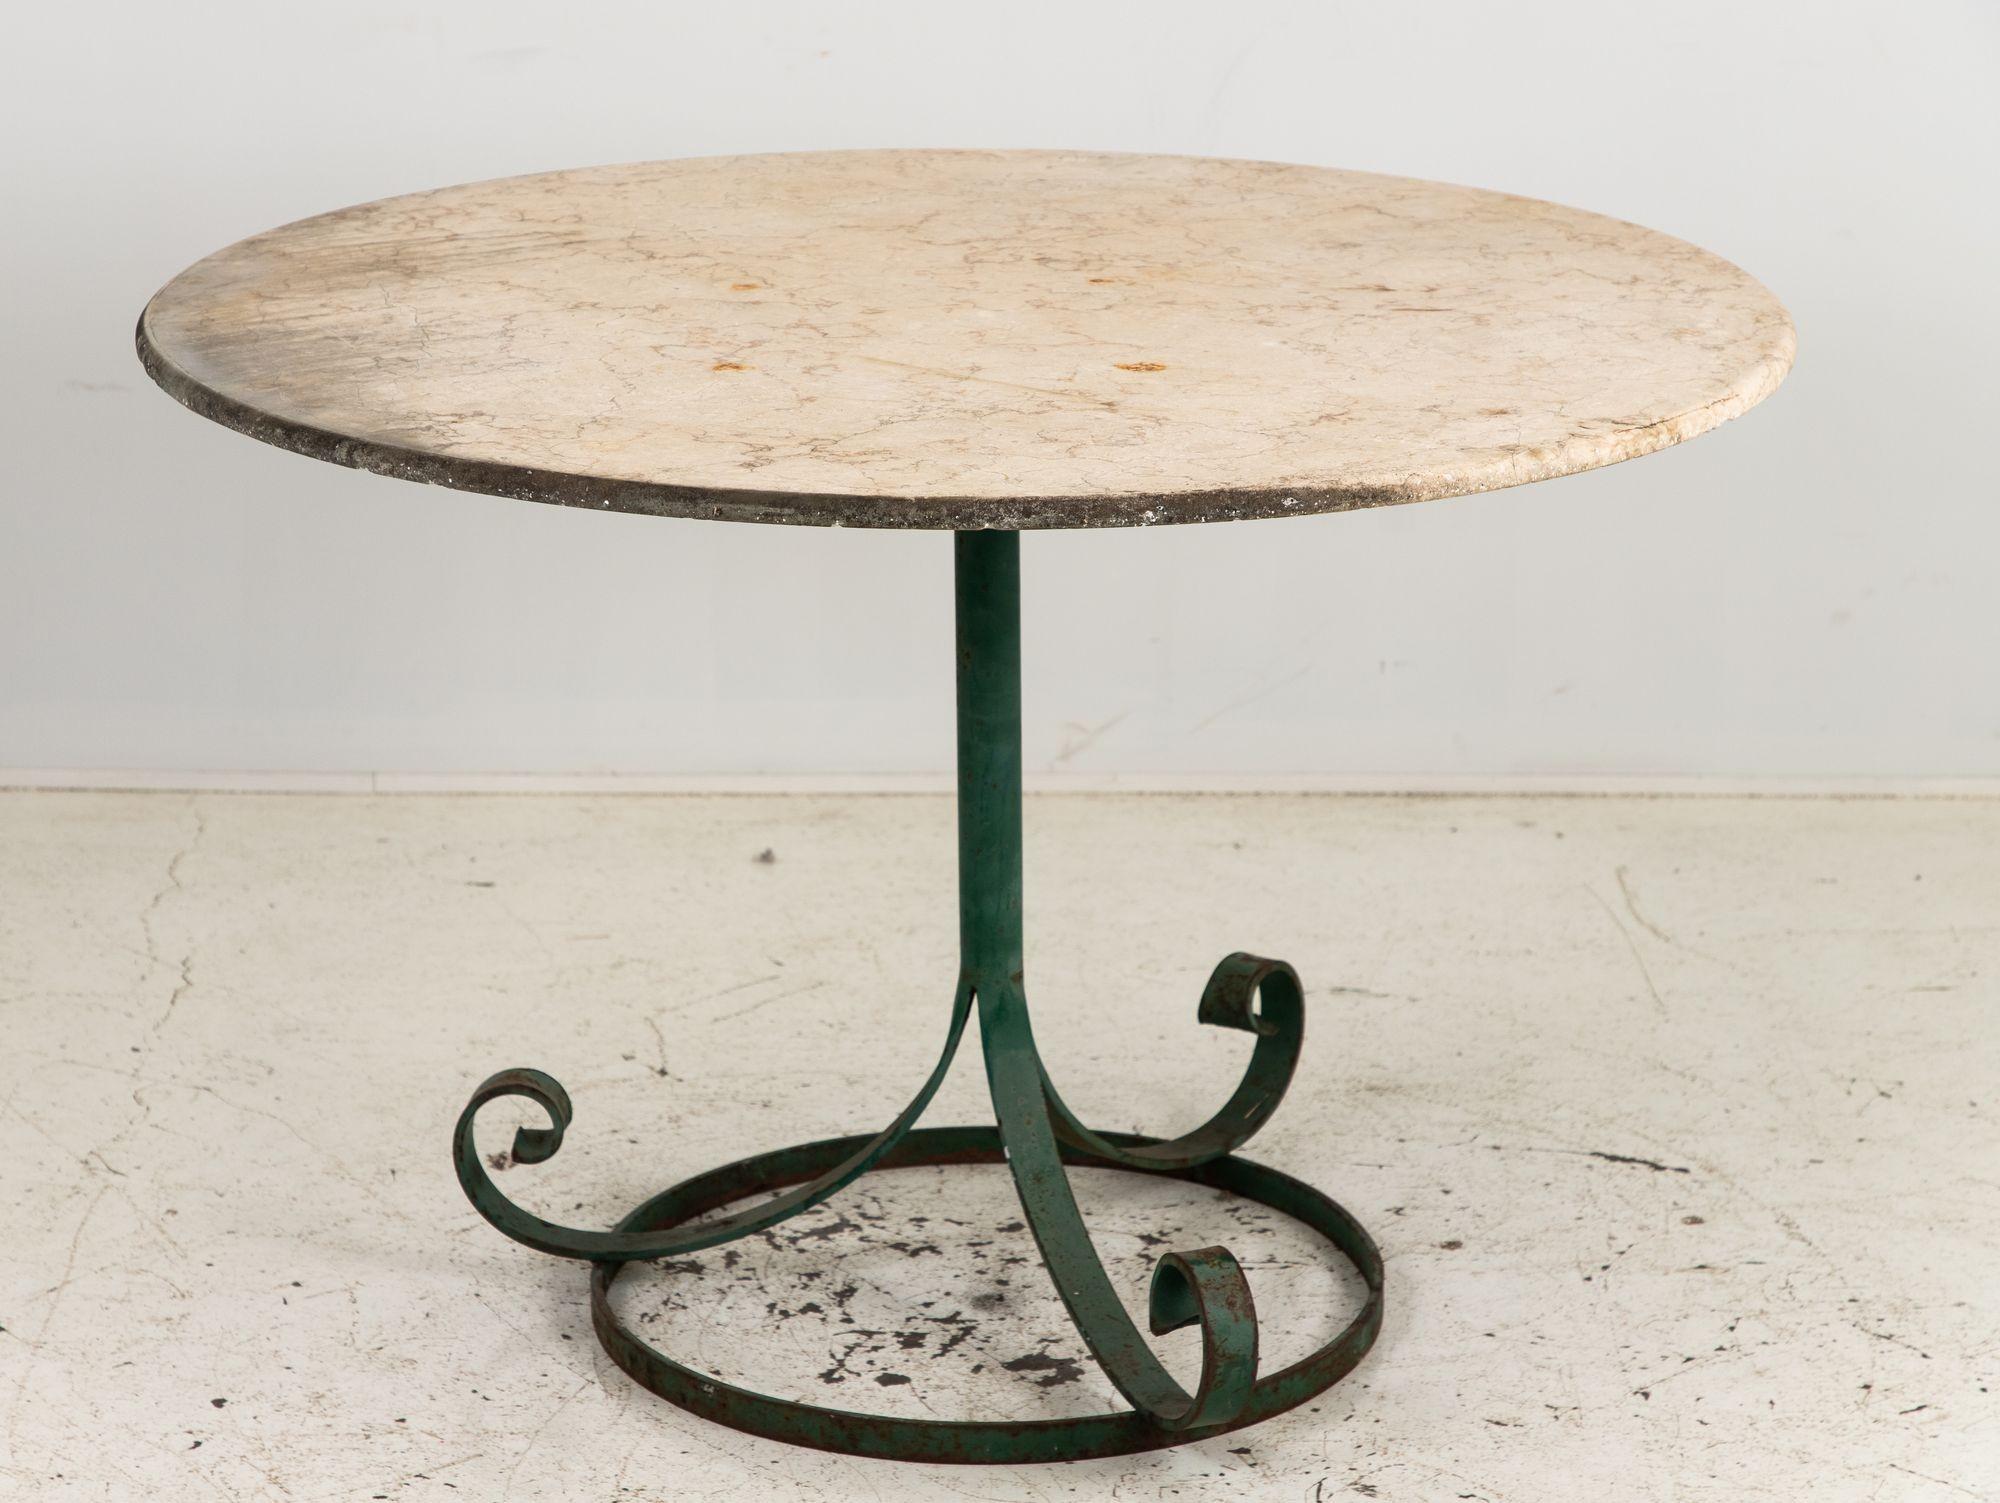 20th Century Marble Topped Garden or Pub Table with Green Iron Base, French 20th c. For Sale